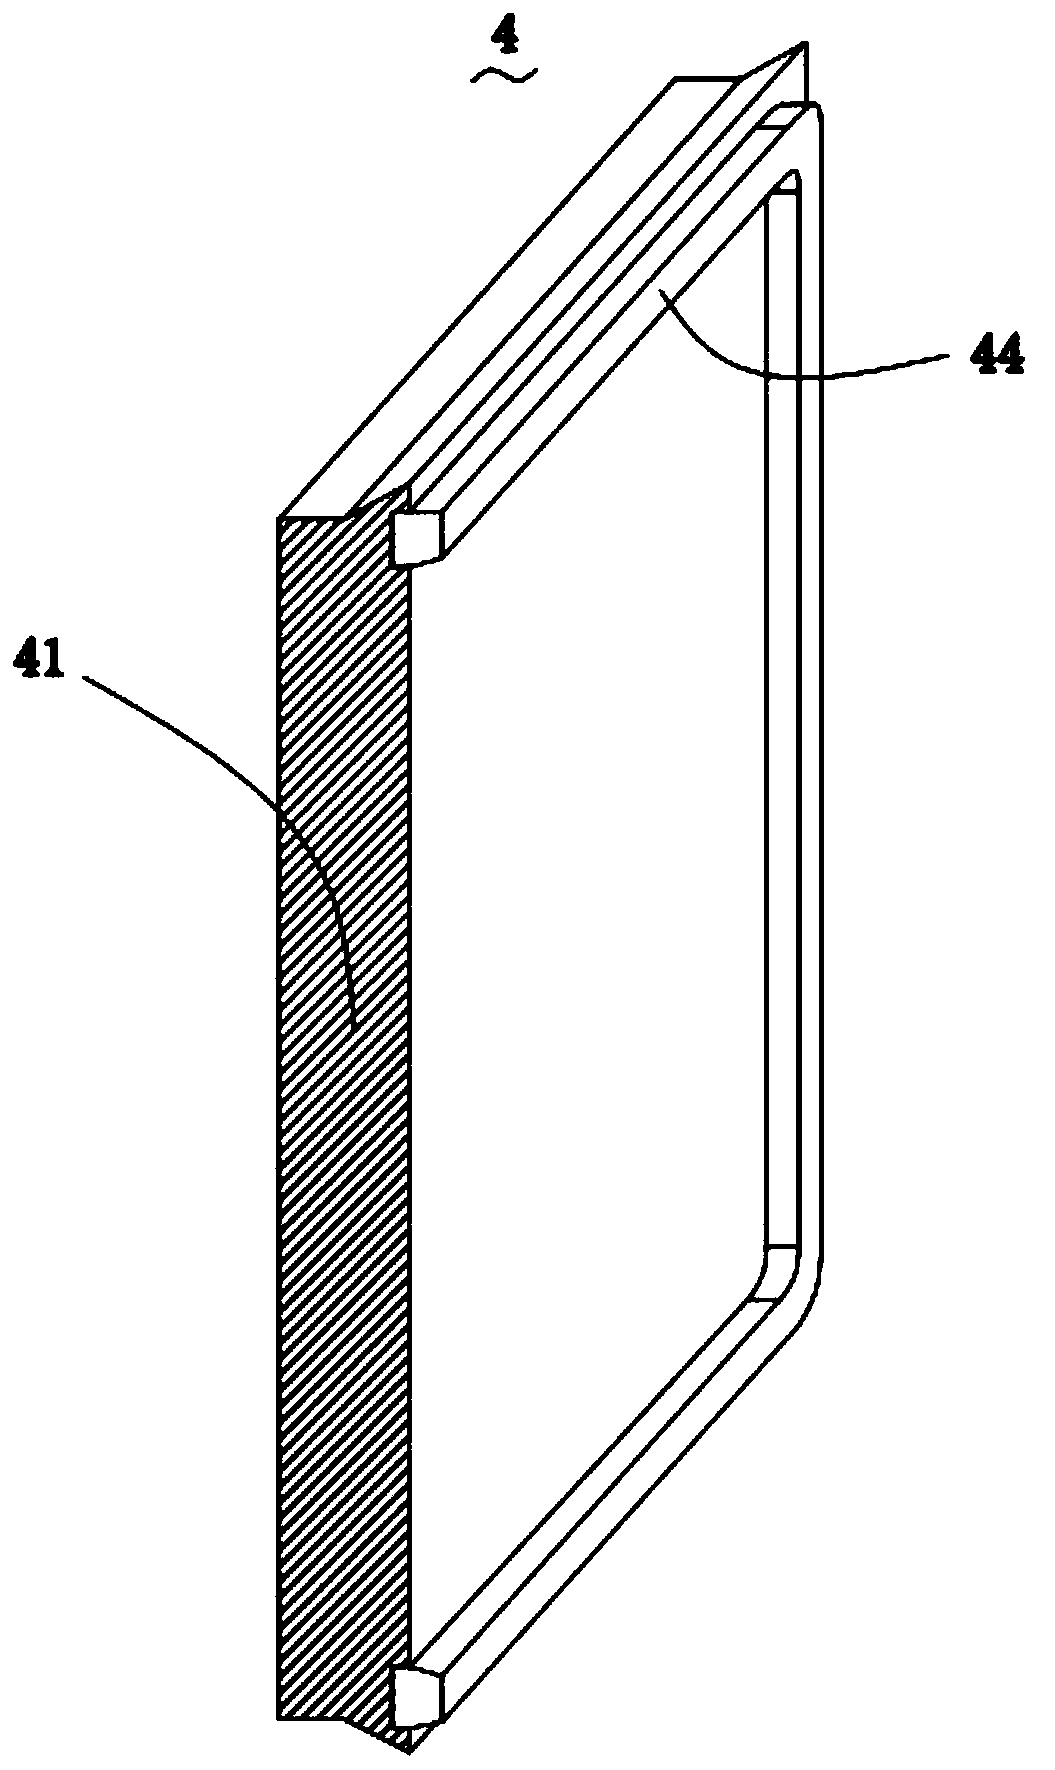 A highway drainage device